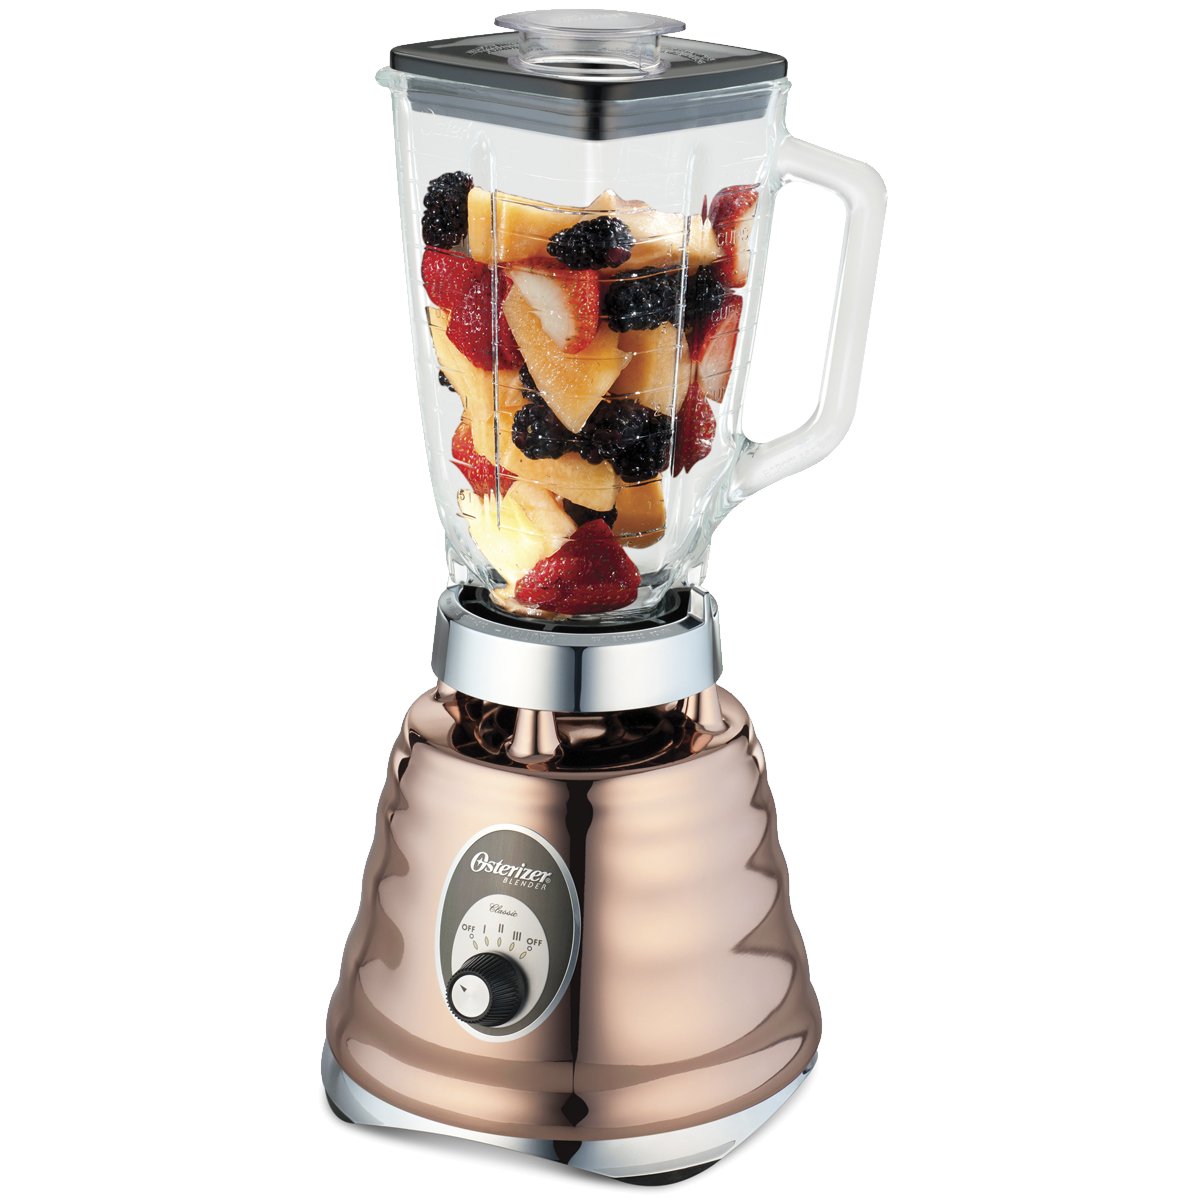 Oster 4128 Classic 3-Speed Beehive Blender